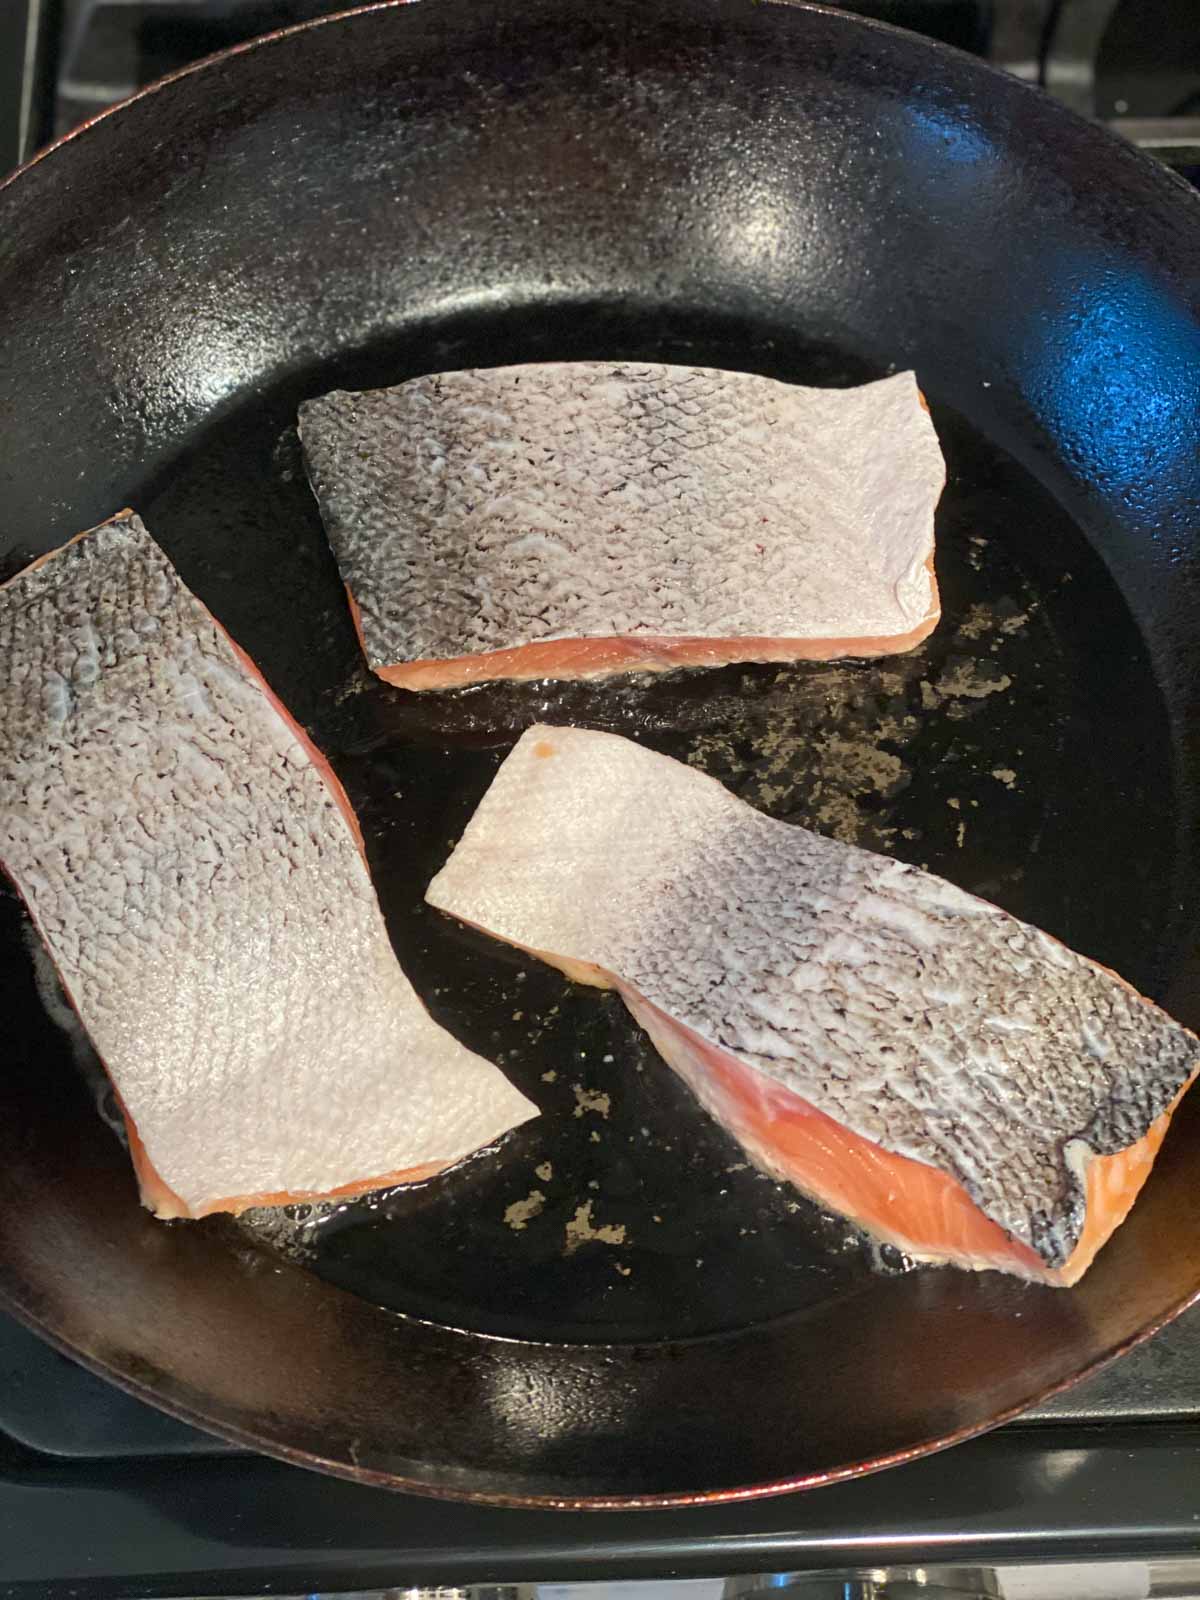 Salmon fillets being seared skin side up in a cast iron pan.